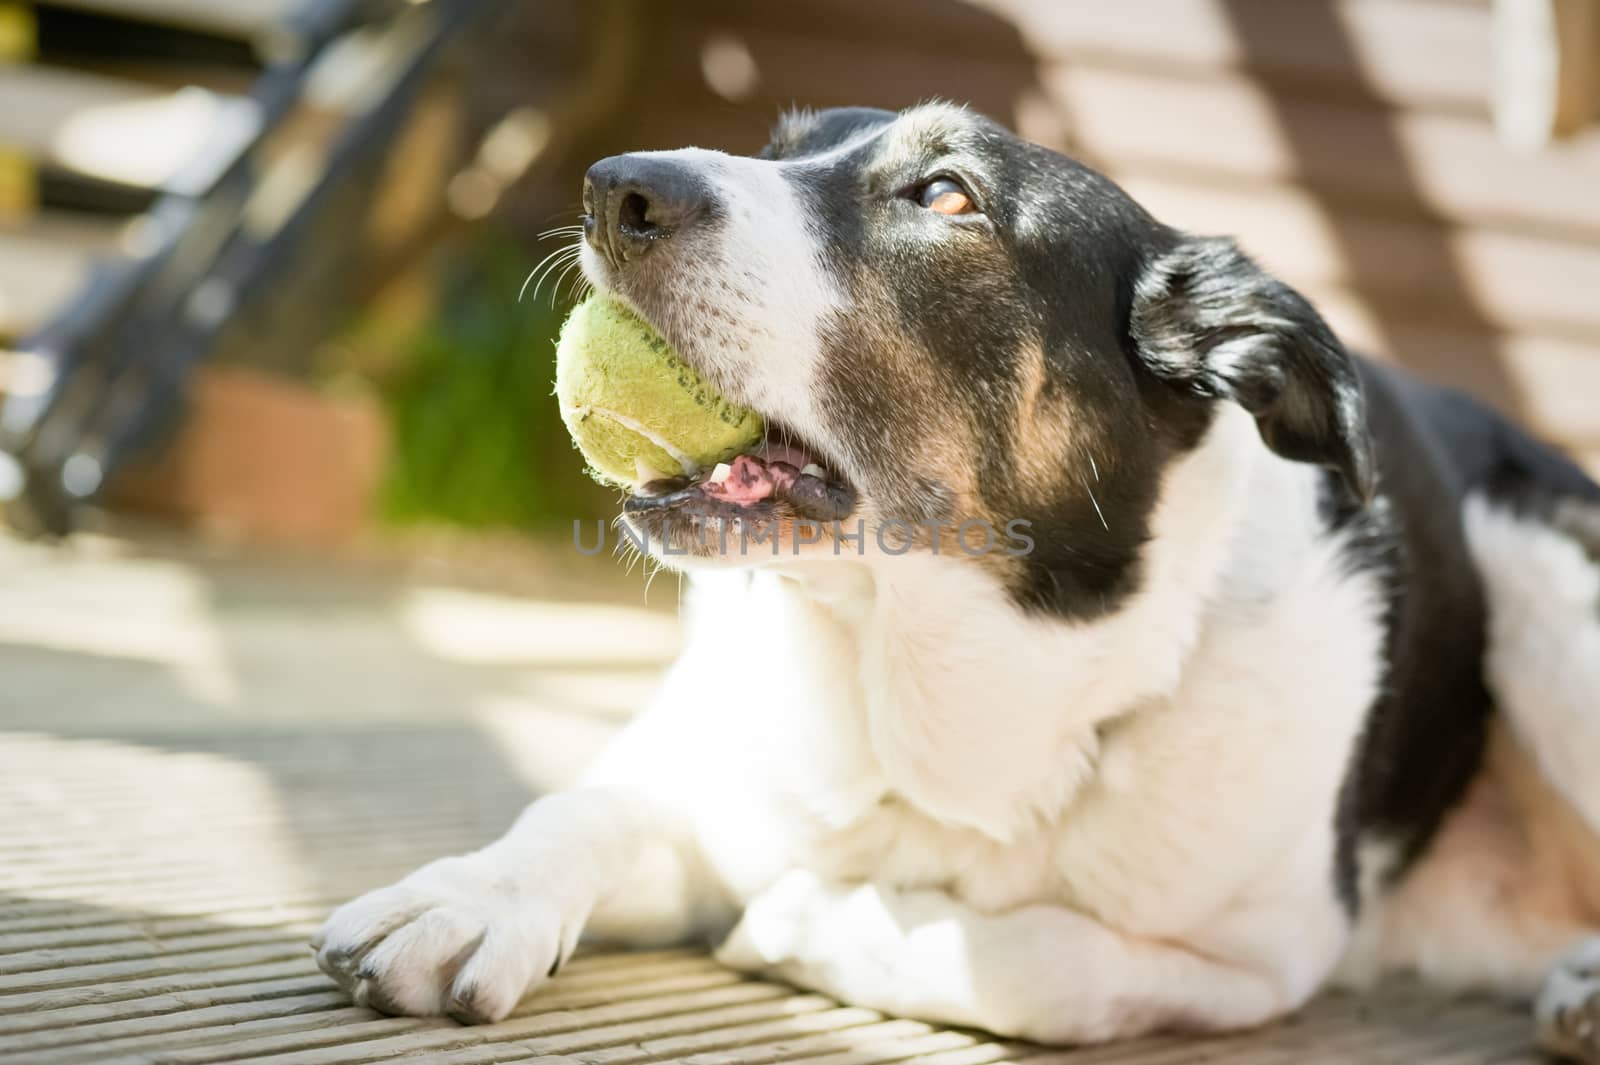 collie-cross dog with a tennis ball in his mouth